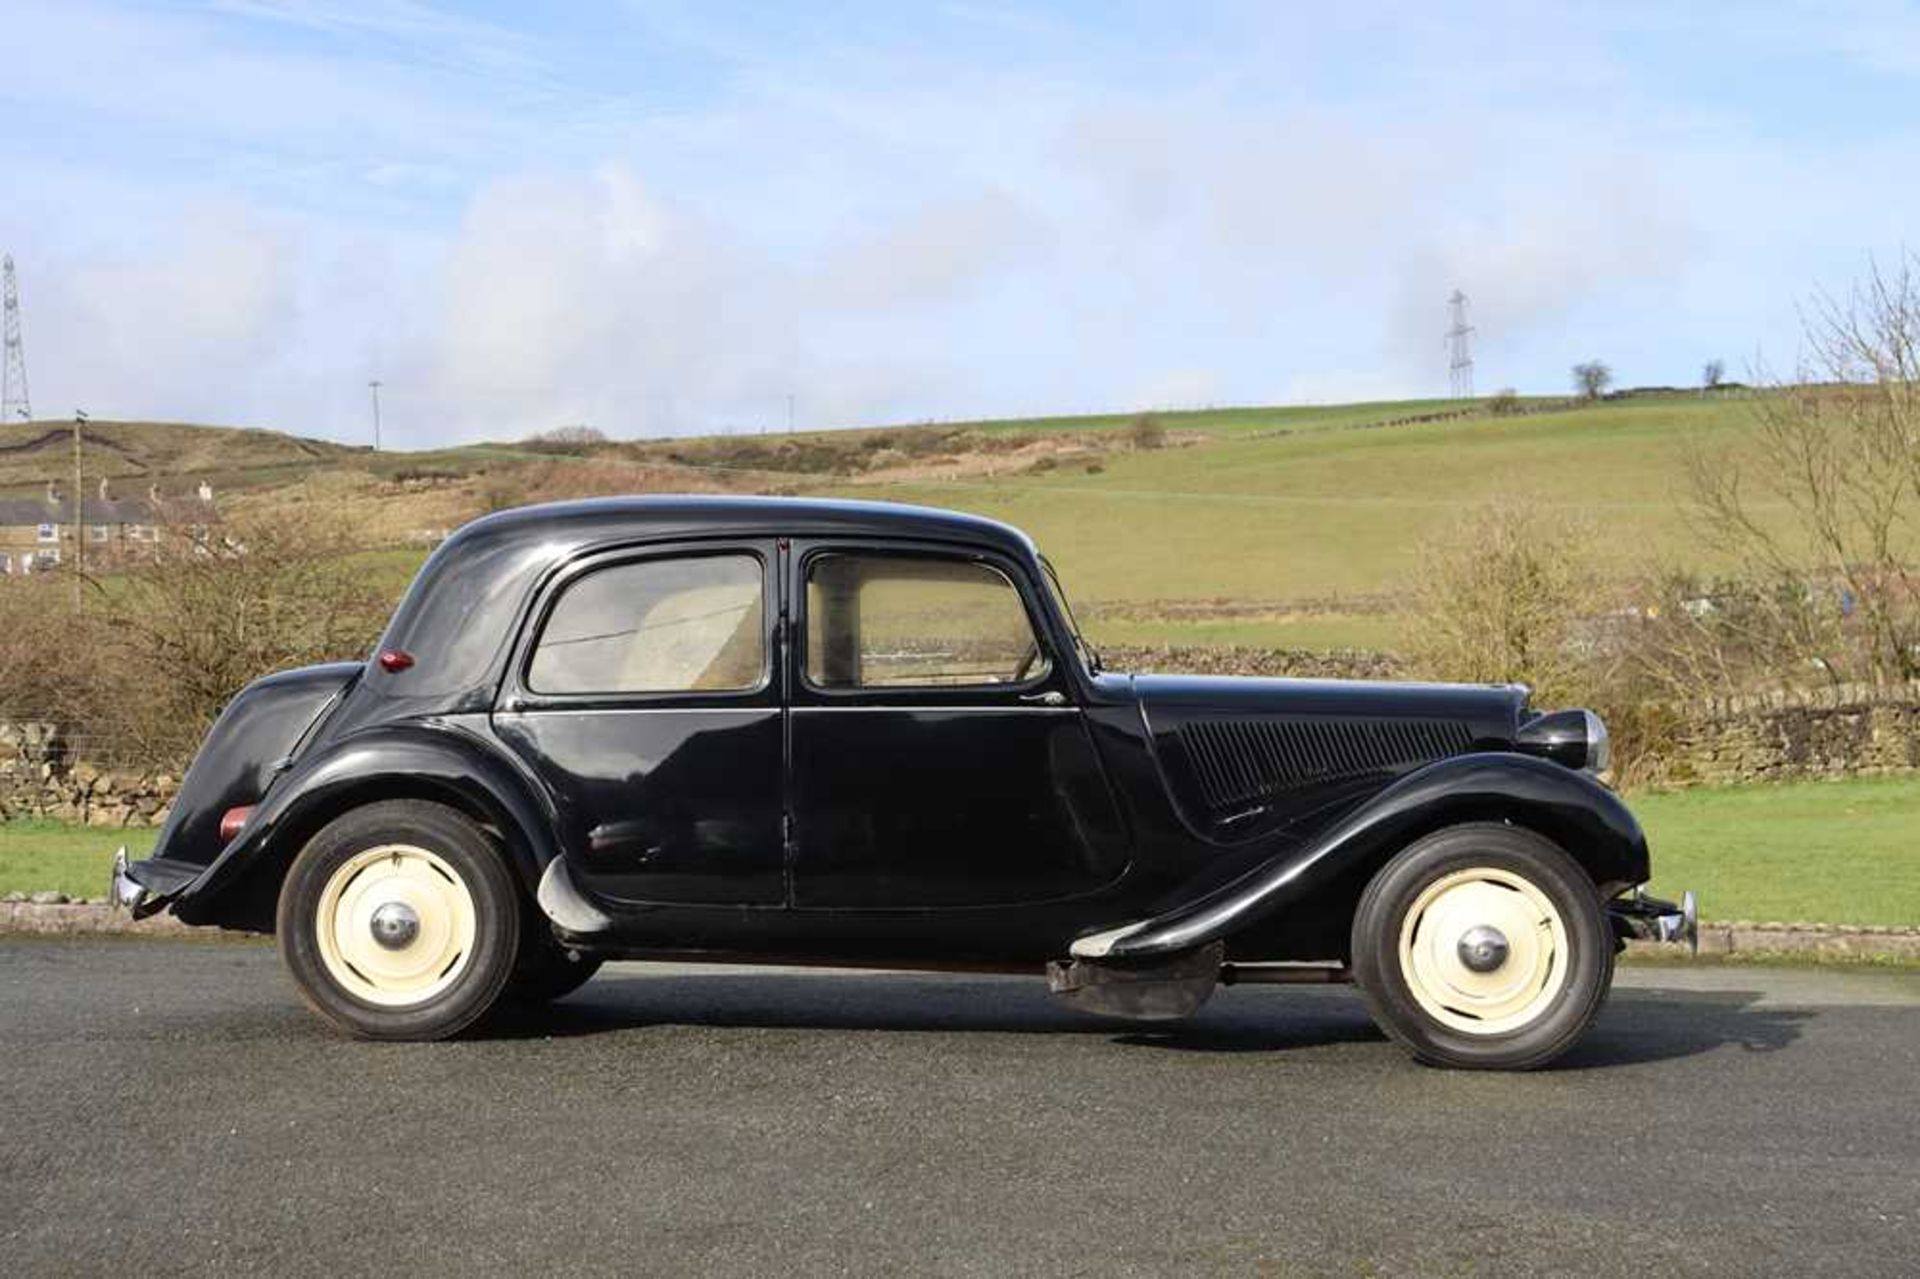 1952 Citroën 11BL Traction Avant In current ownership for over 40 years - Image 10 of 60